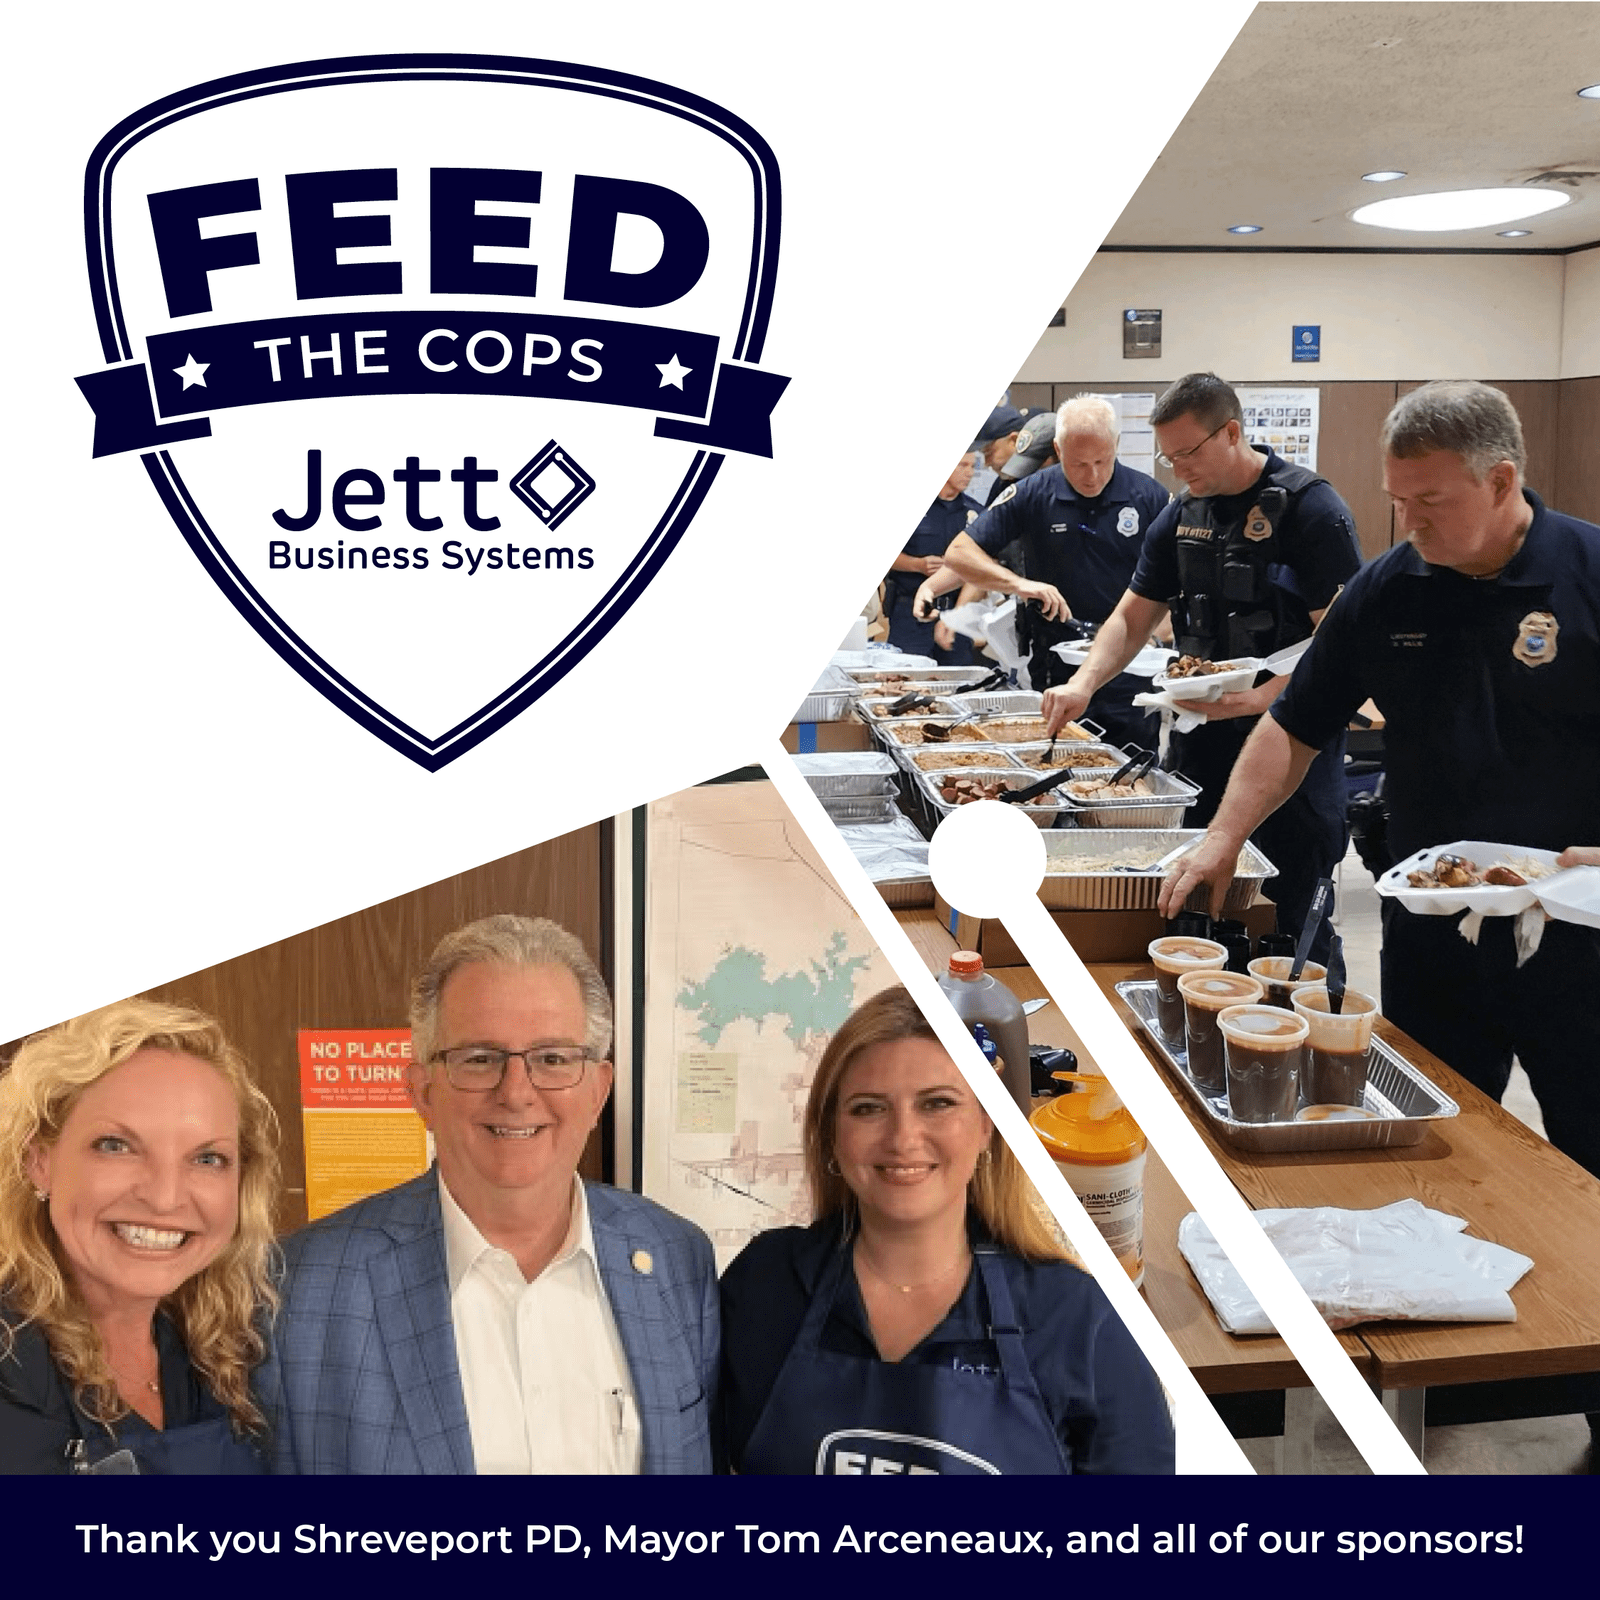 4th Annual Feed The Cops and Feed The Fire Event